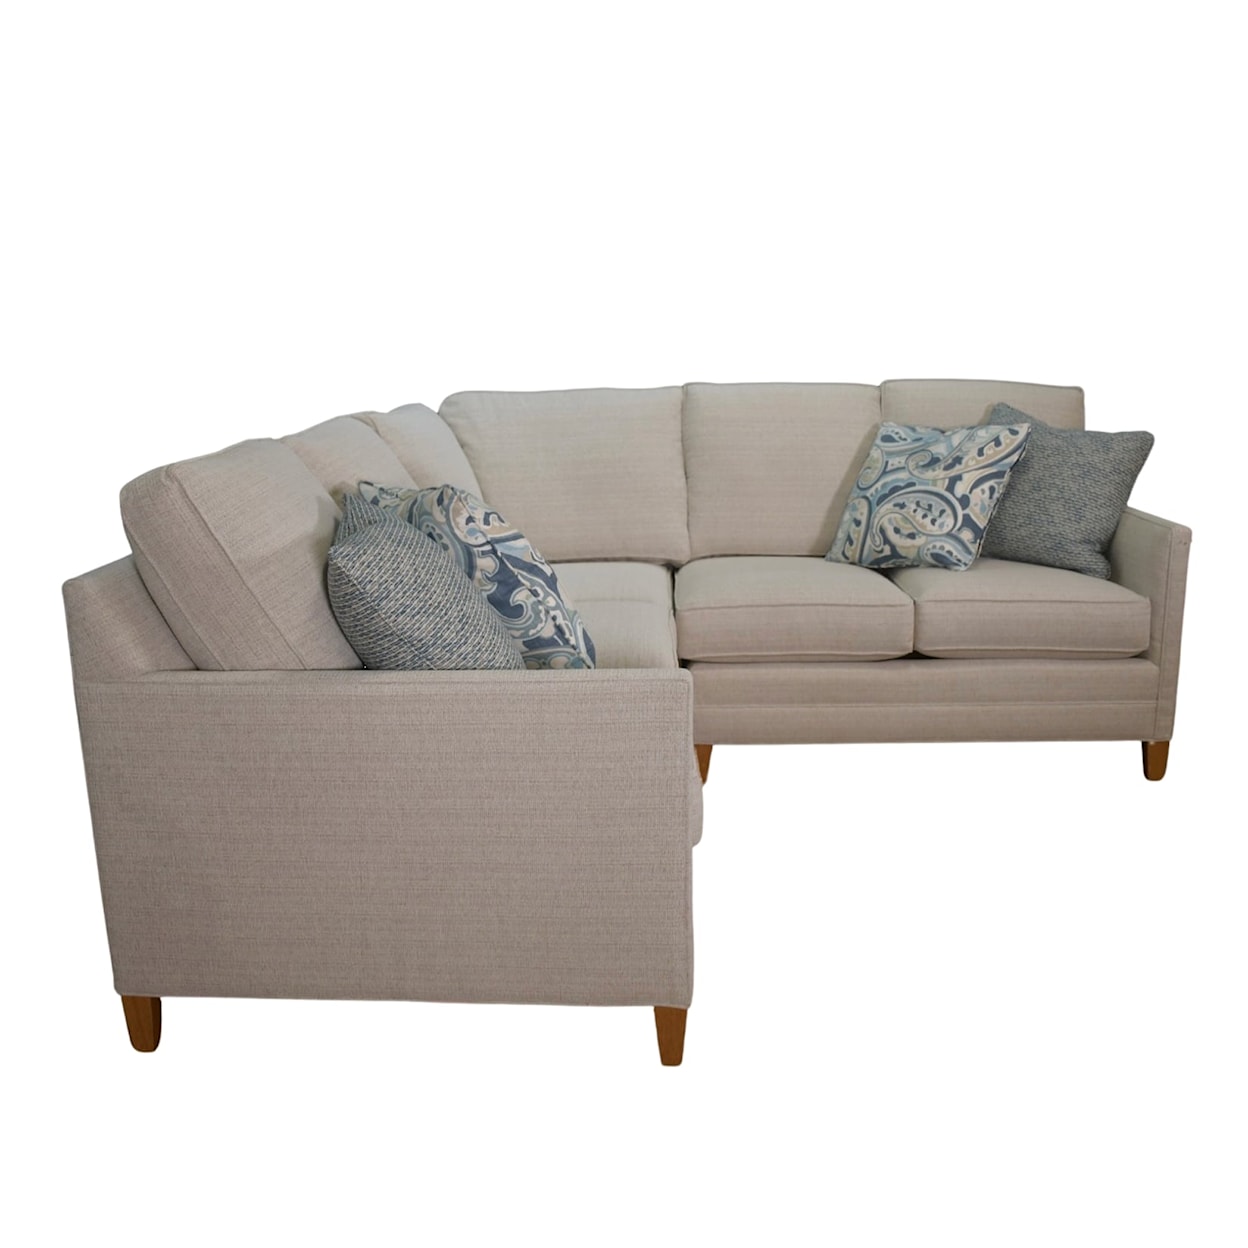 Temple Furniture Tailor Made 2 PIECE SECTIONAL